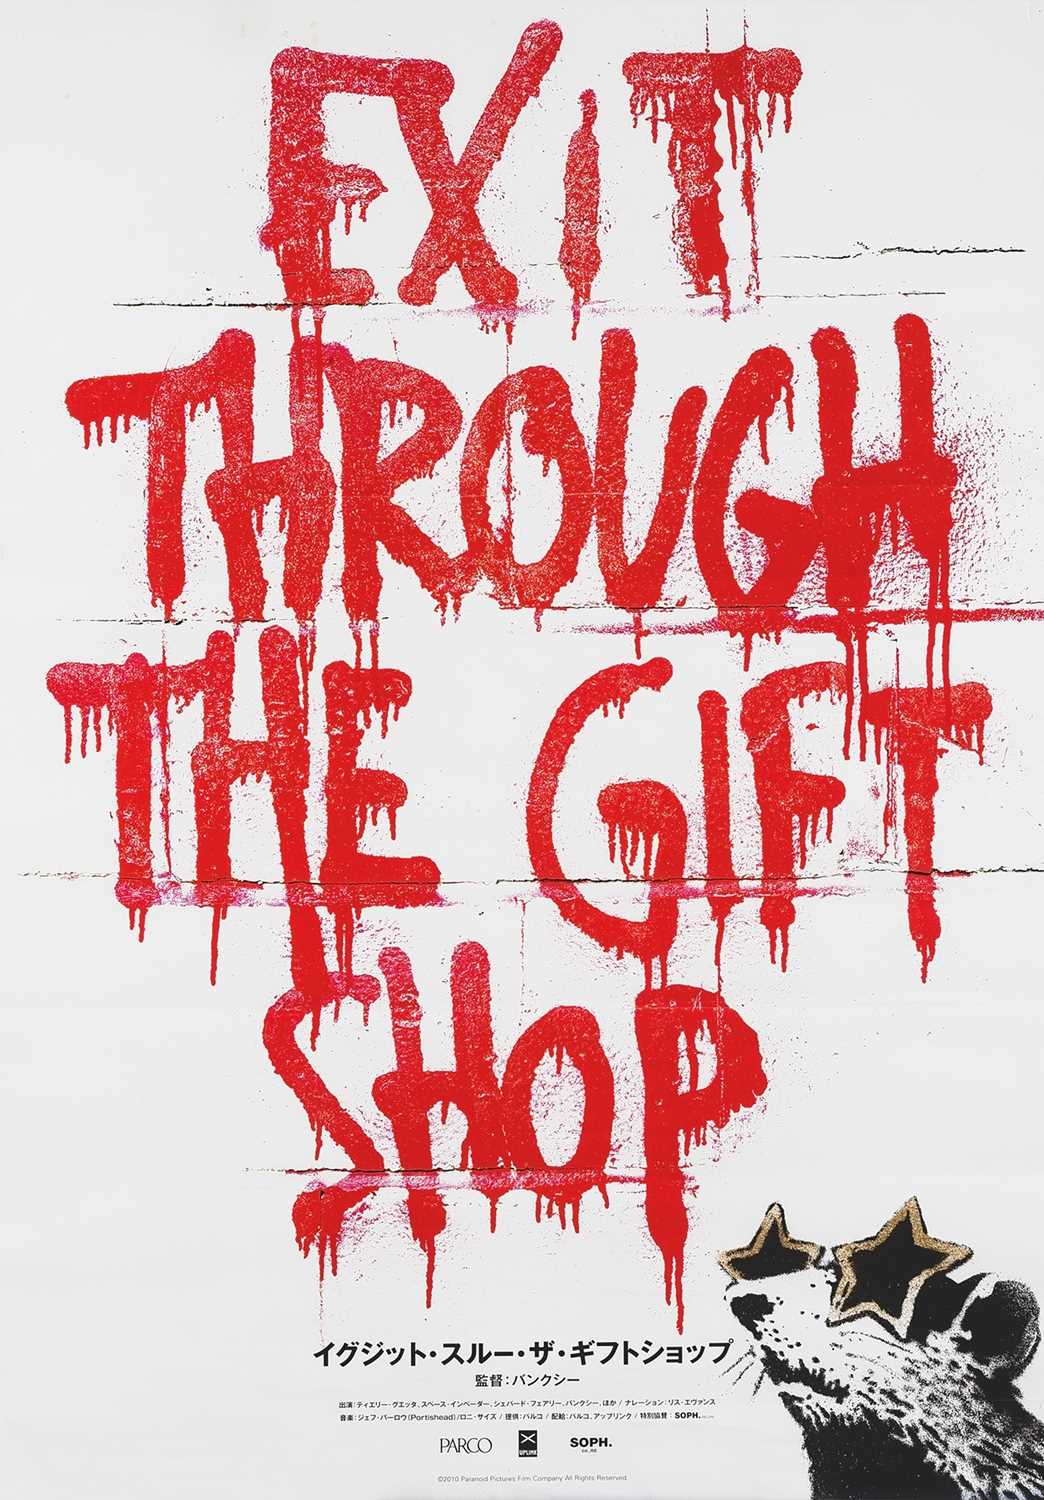 Lot 77 - Banksy (British 1974-), 'Exit Through The Gift Shop (Japanese)', 2011